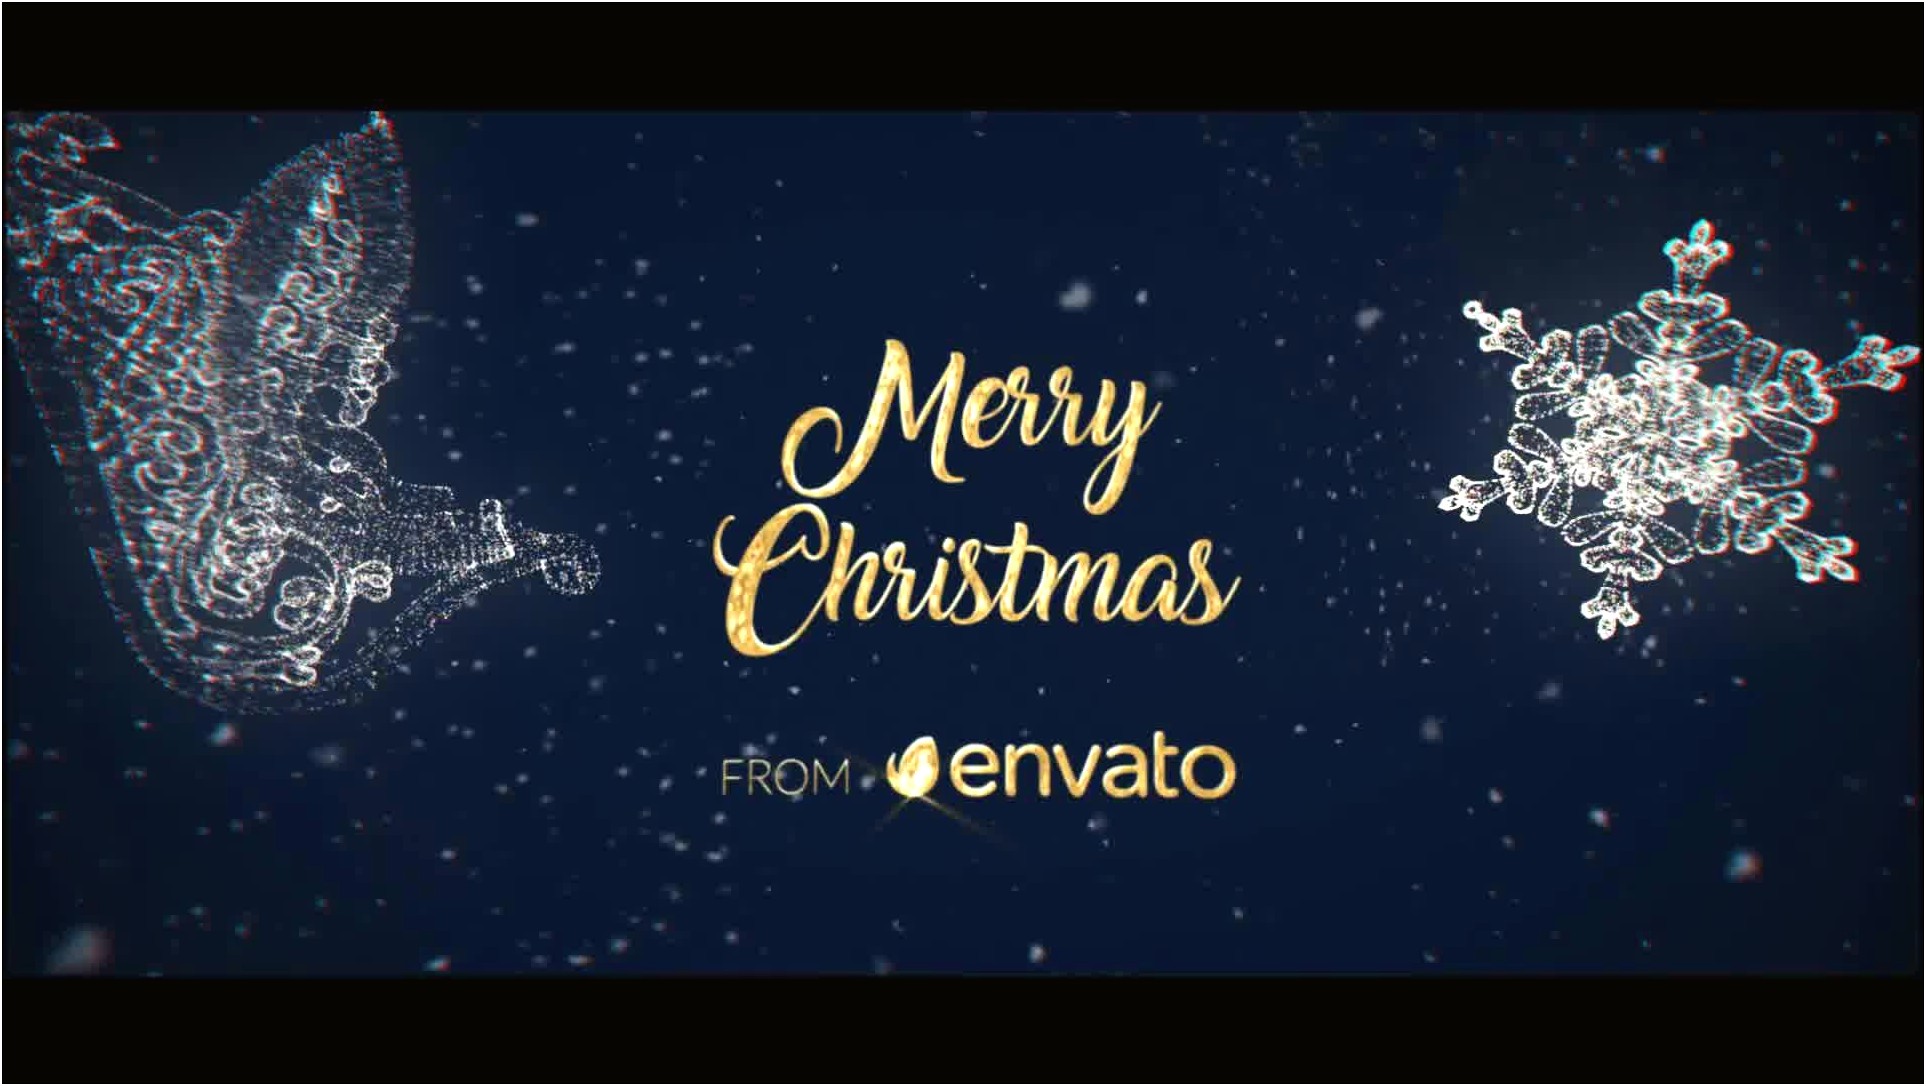 Free Christmas Greetings After Effects Template